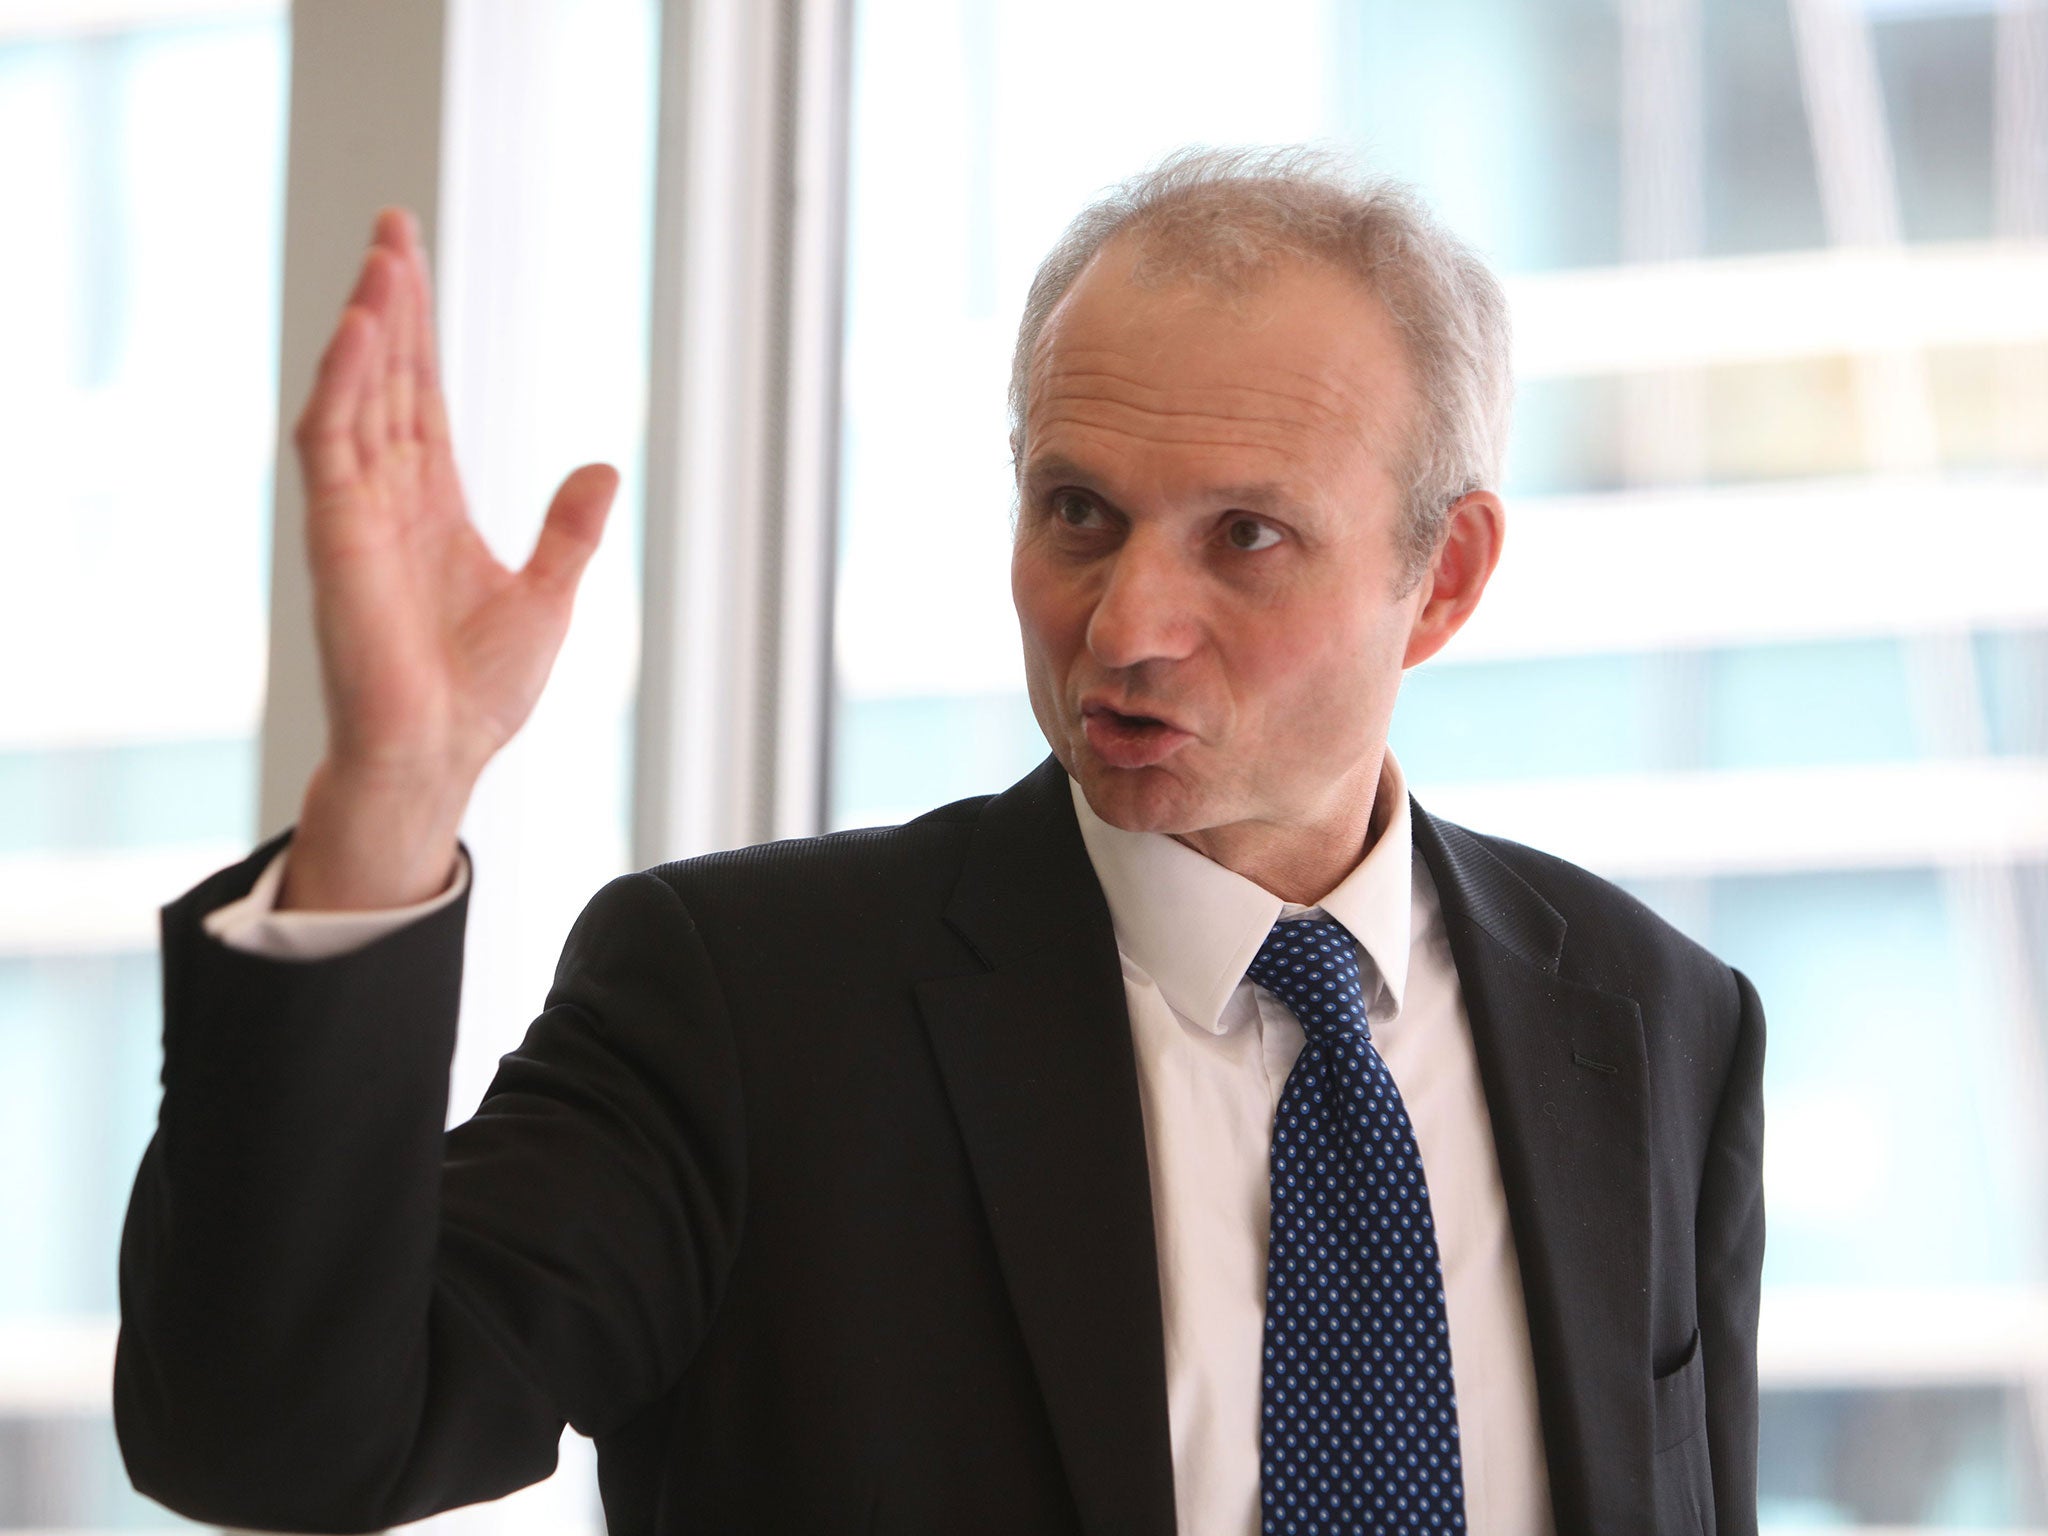 David Lidington MP, the Minister for Europe, has defended the campaign